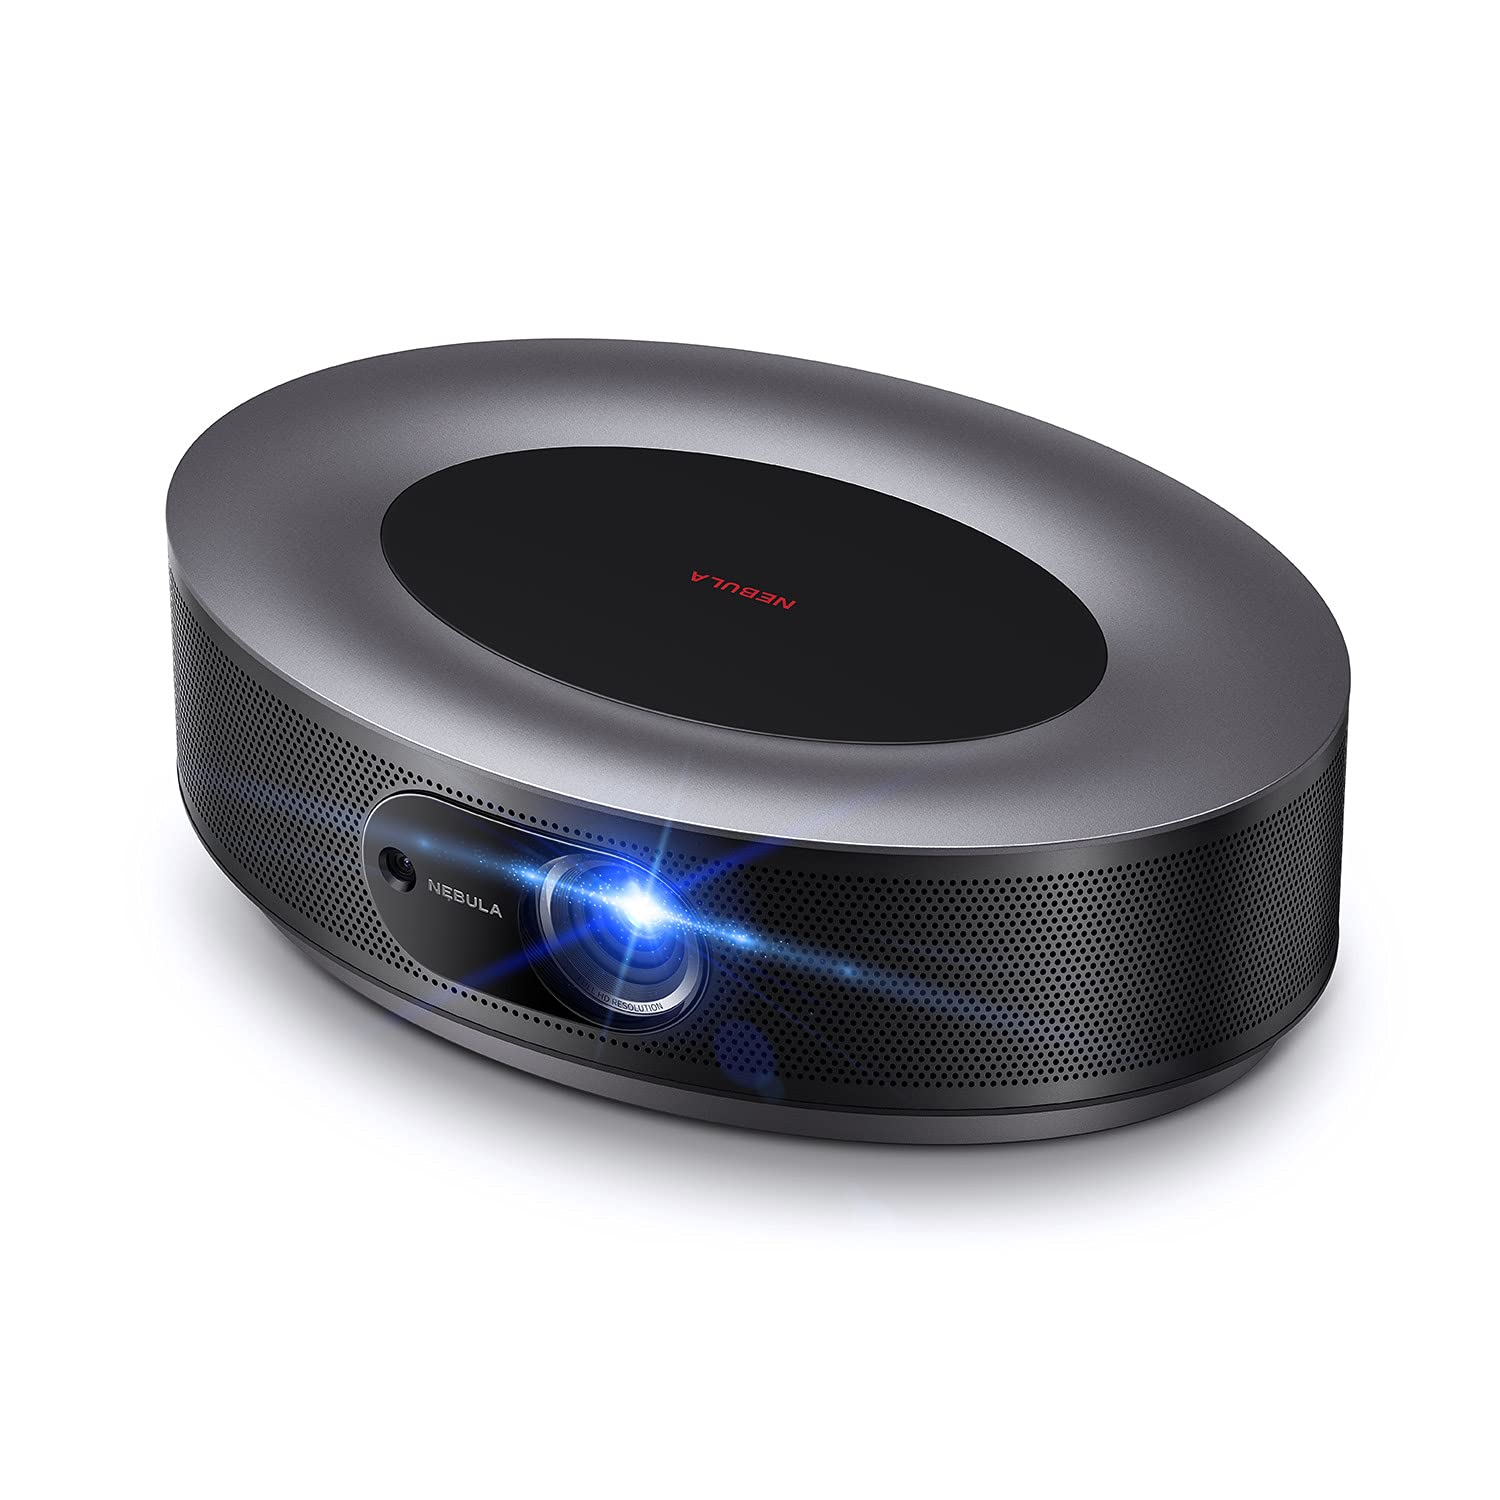 Anker Nebula Cosmos Full HD 1080p Home Entertainment Projector: \